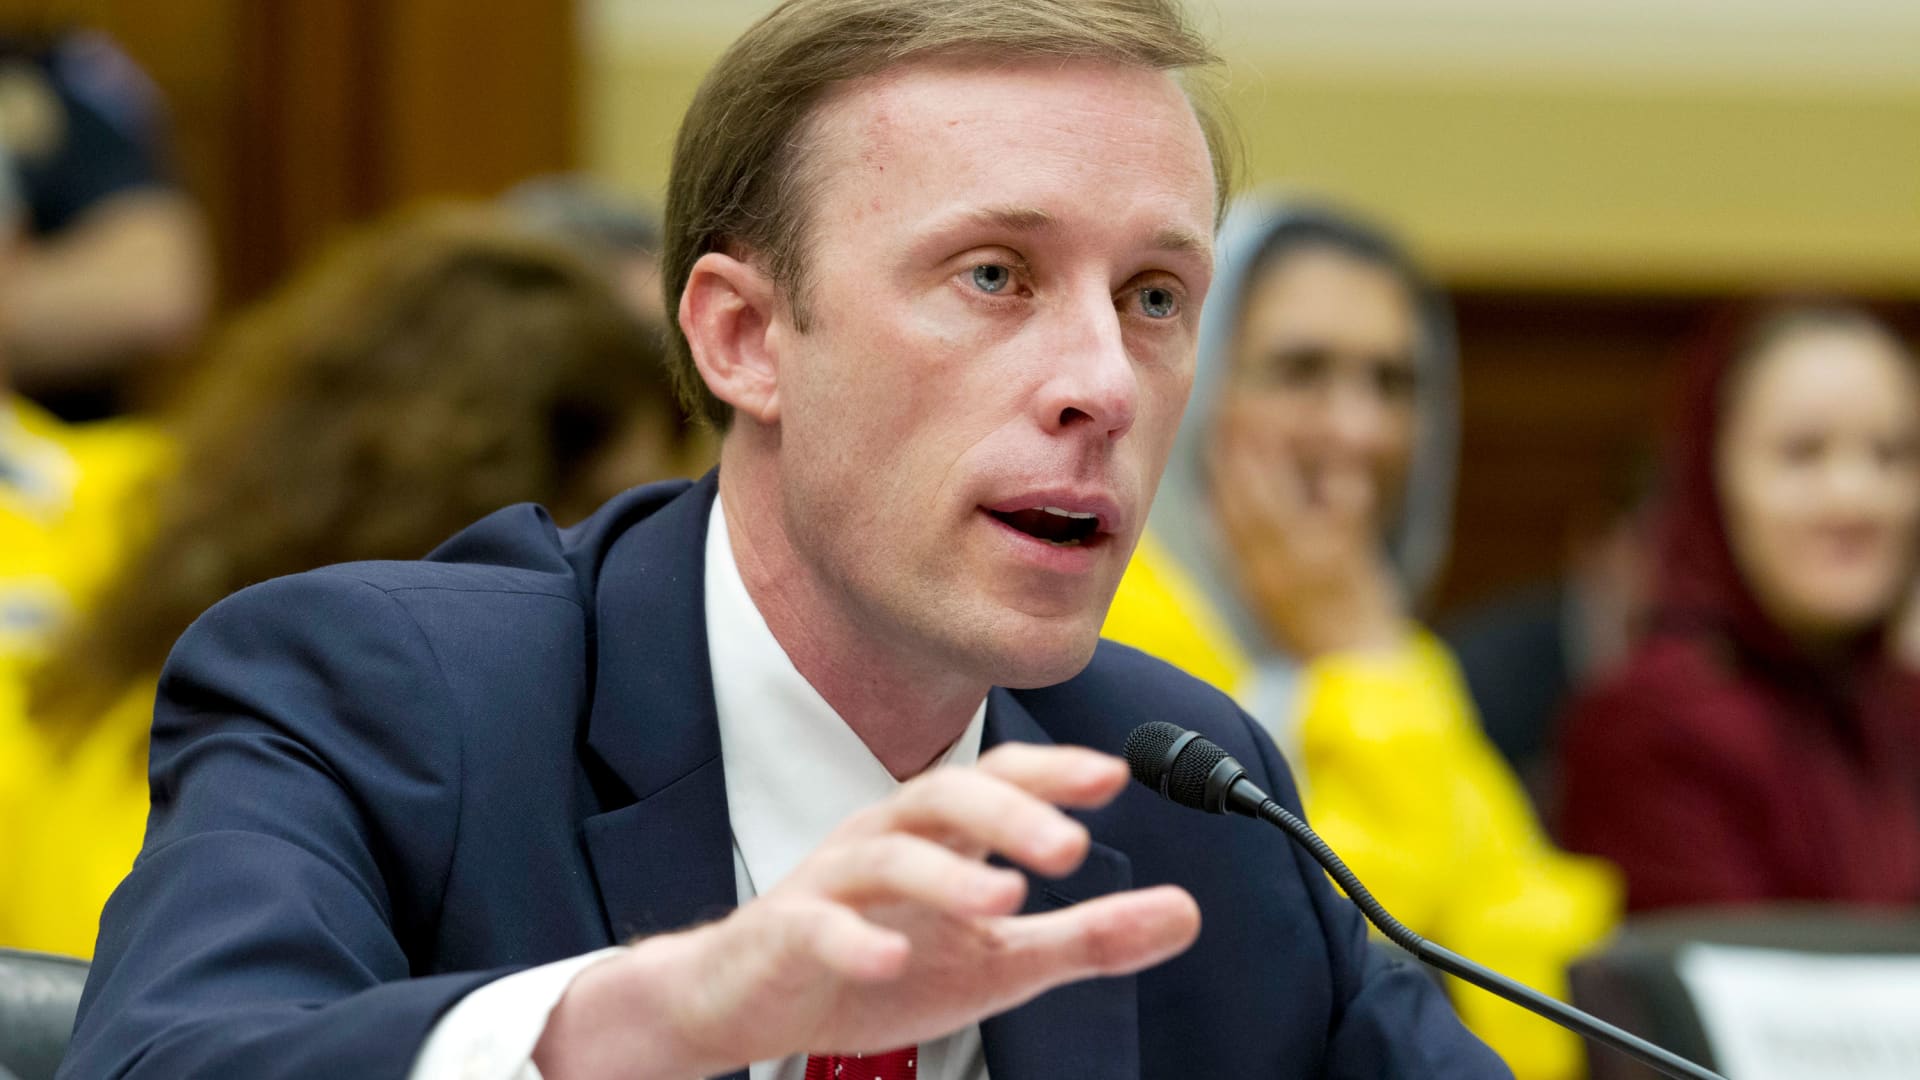 Former State Department Director of Policy Planning Jake Sullivan speaks during a hearing on Iran before the House Foreign Affairs Committee at Capitol Hill in Washington on Wednesday, Oct. 11, 2017.